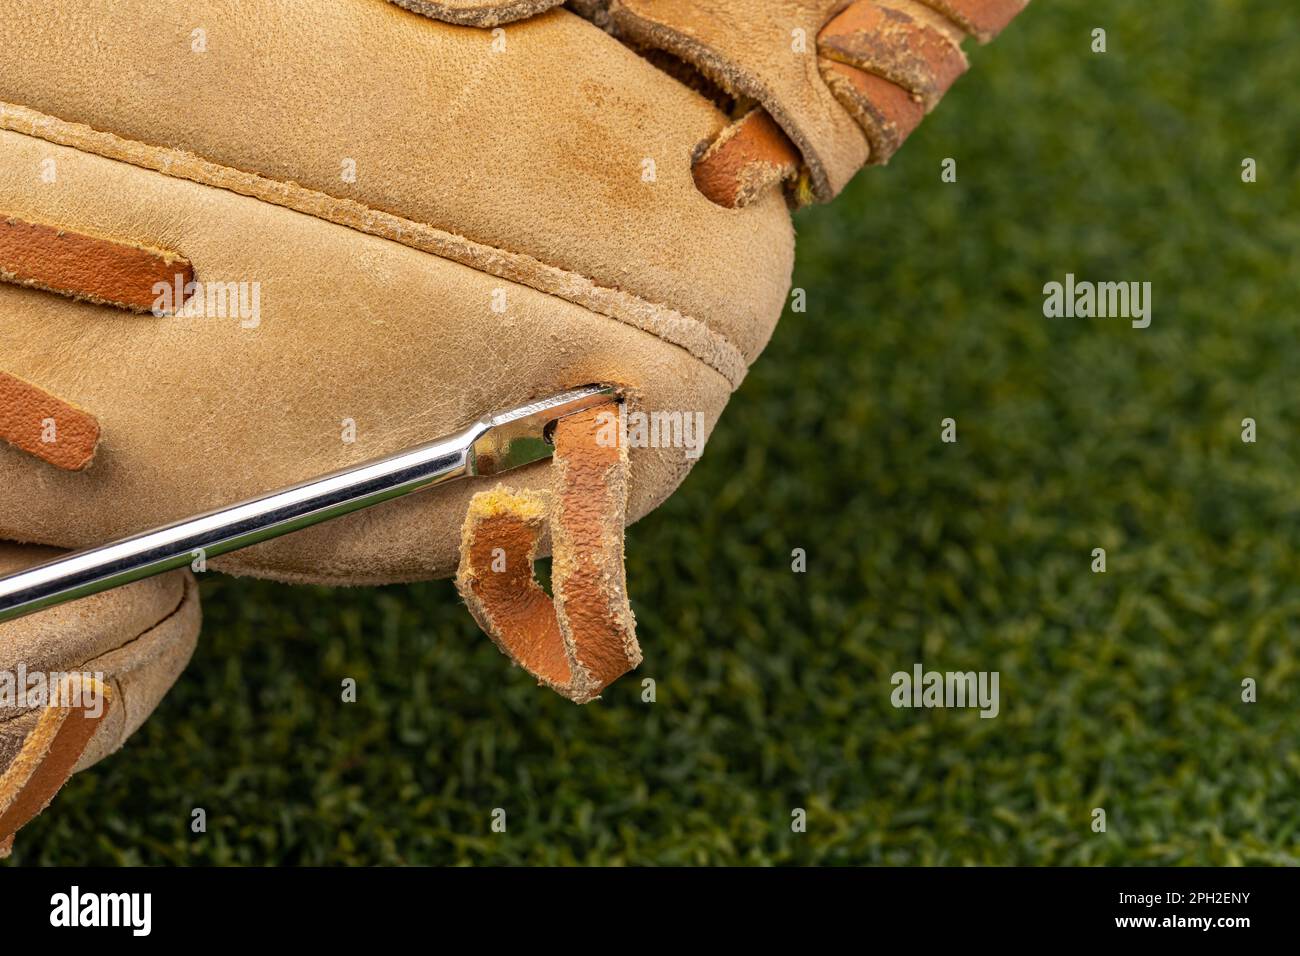 Repairing baseball glove laces with lacing needle. Glove relacing, sports equipment repair and maintenance concept. Stock Photo